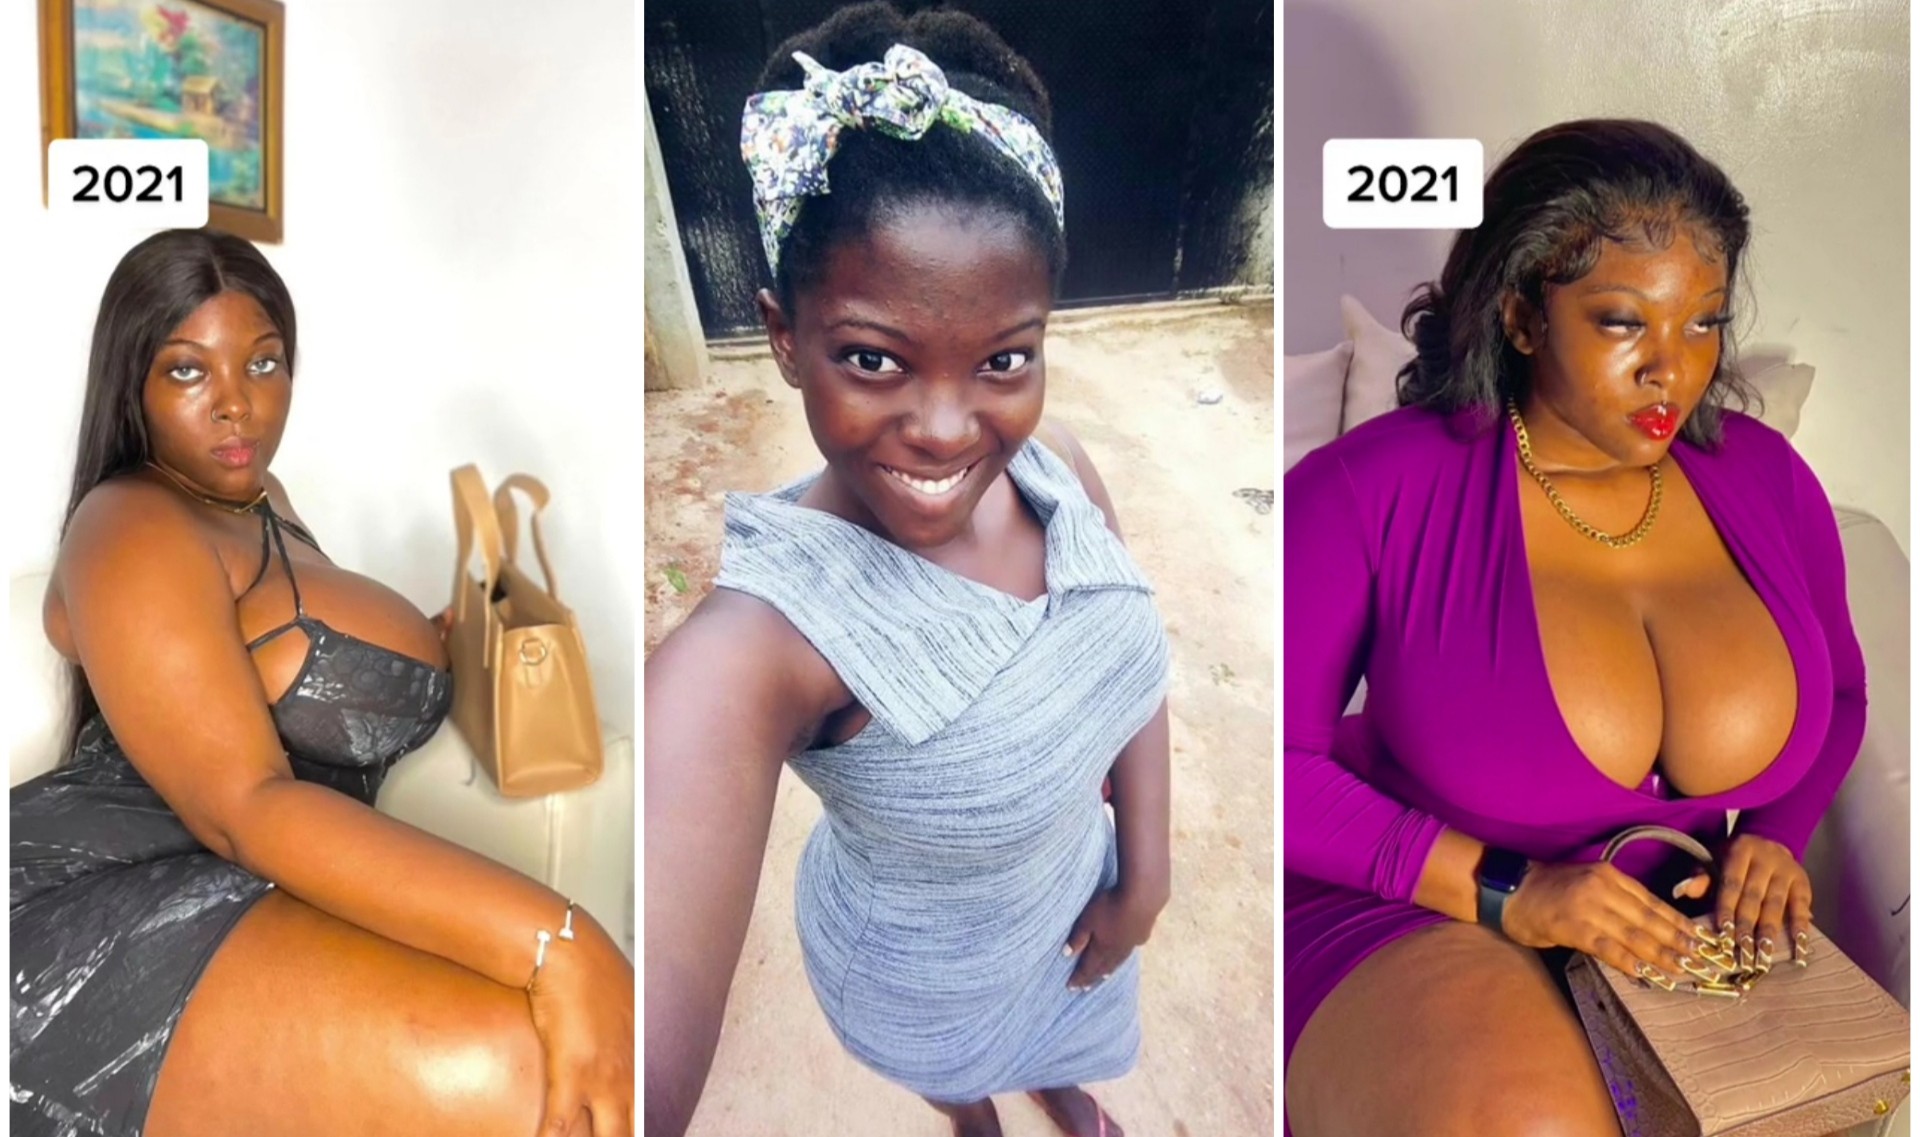 VIDEO: Lady’s Incredible Transformation Within 4 Years Will Leave You in Awe